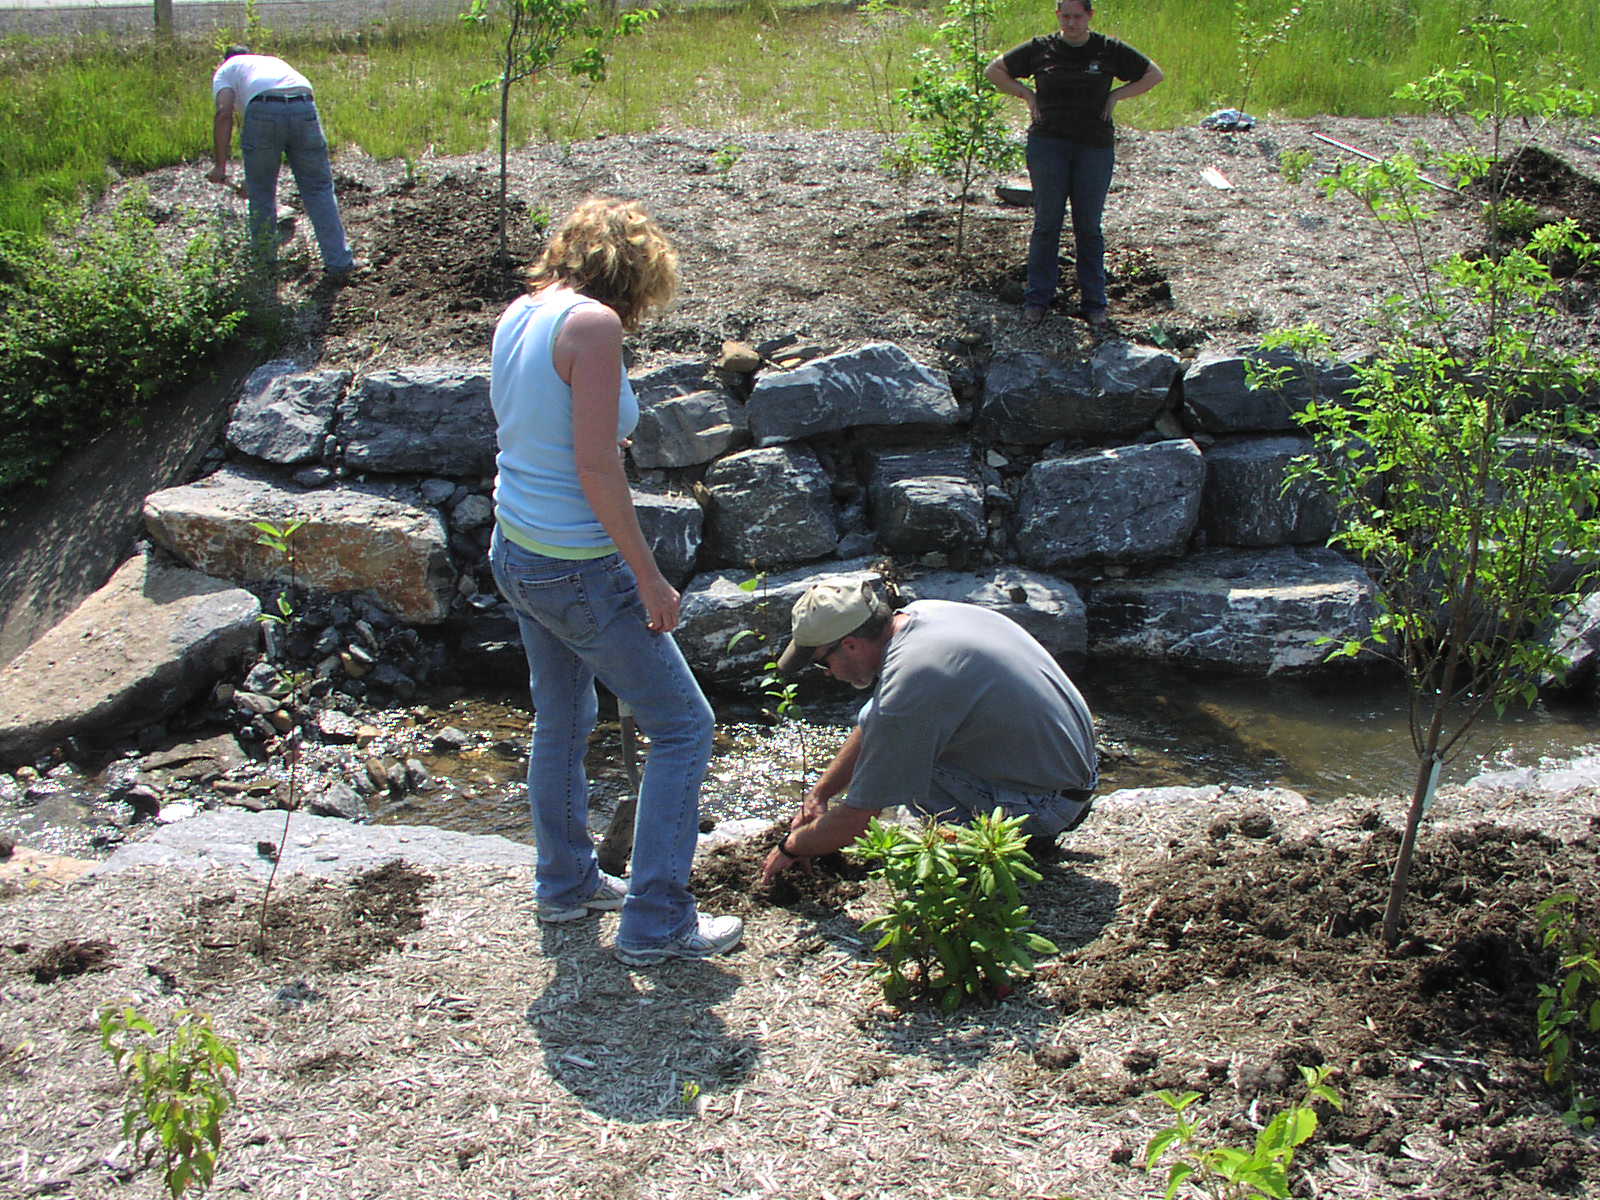 A woman stands over a man who is kneeling to plant a tree next to a stream. The stream was recently restored with large boulders and many new trees.